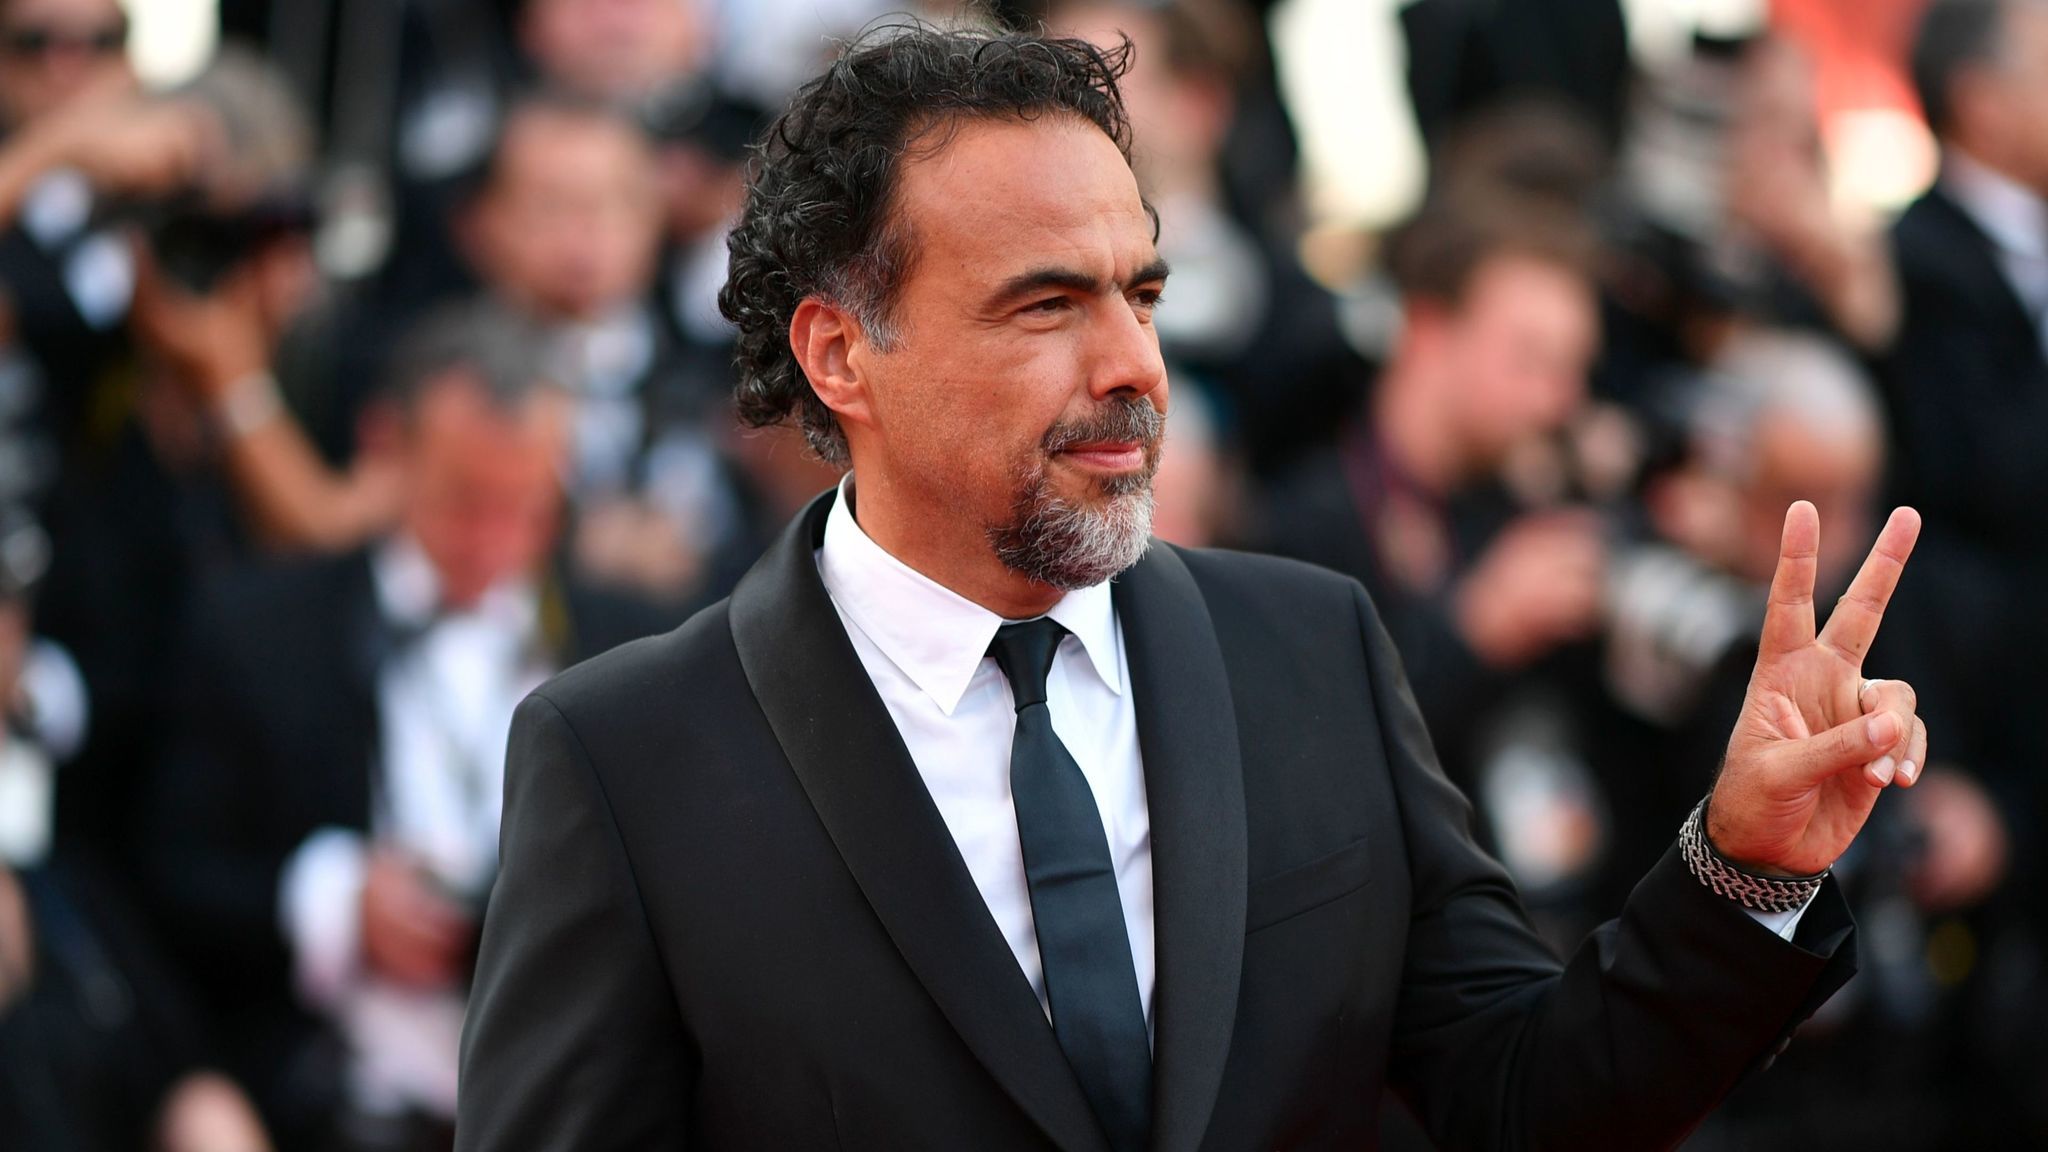 Alejandro G. Iñárritu arrives for a screening of his virtual reality experience "Carne y Arena" at Cannes in May.